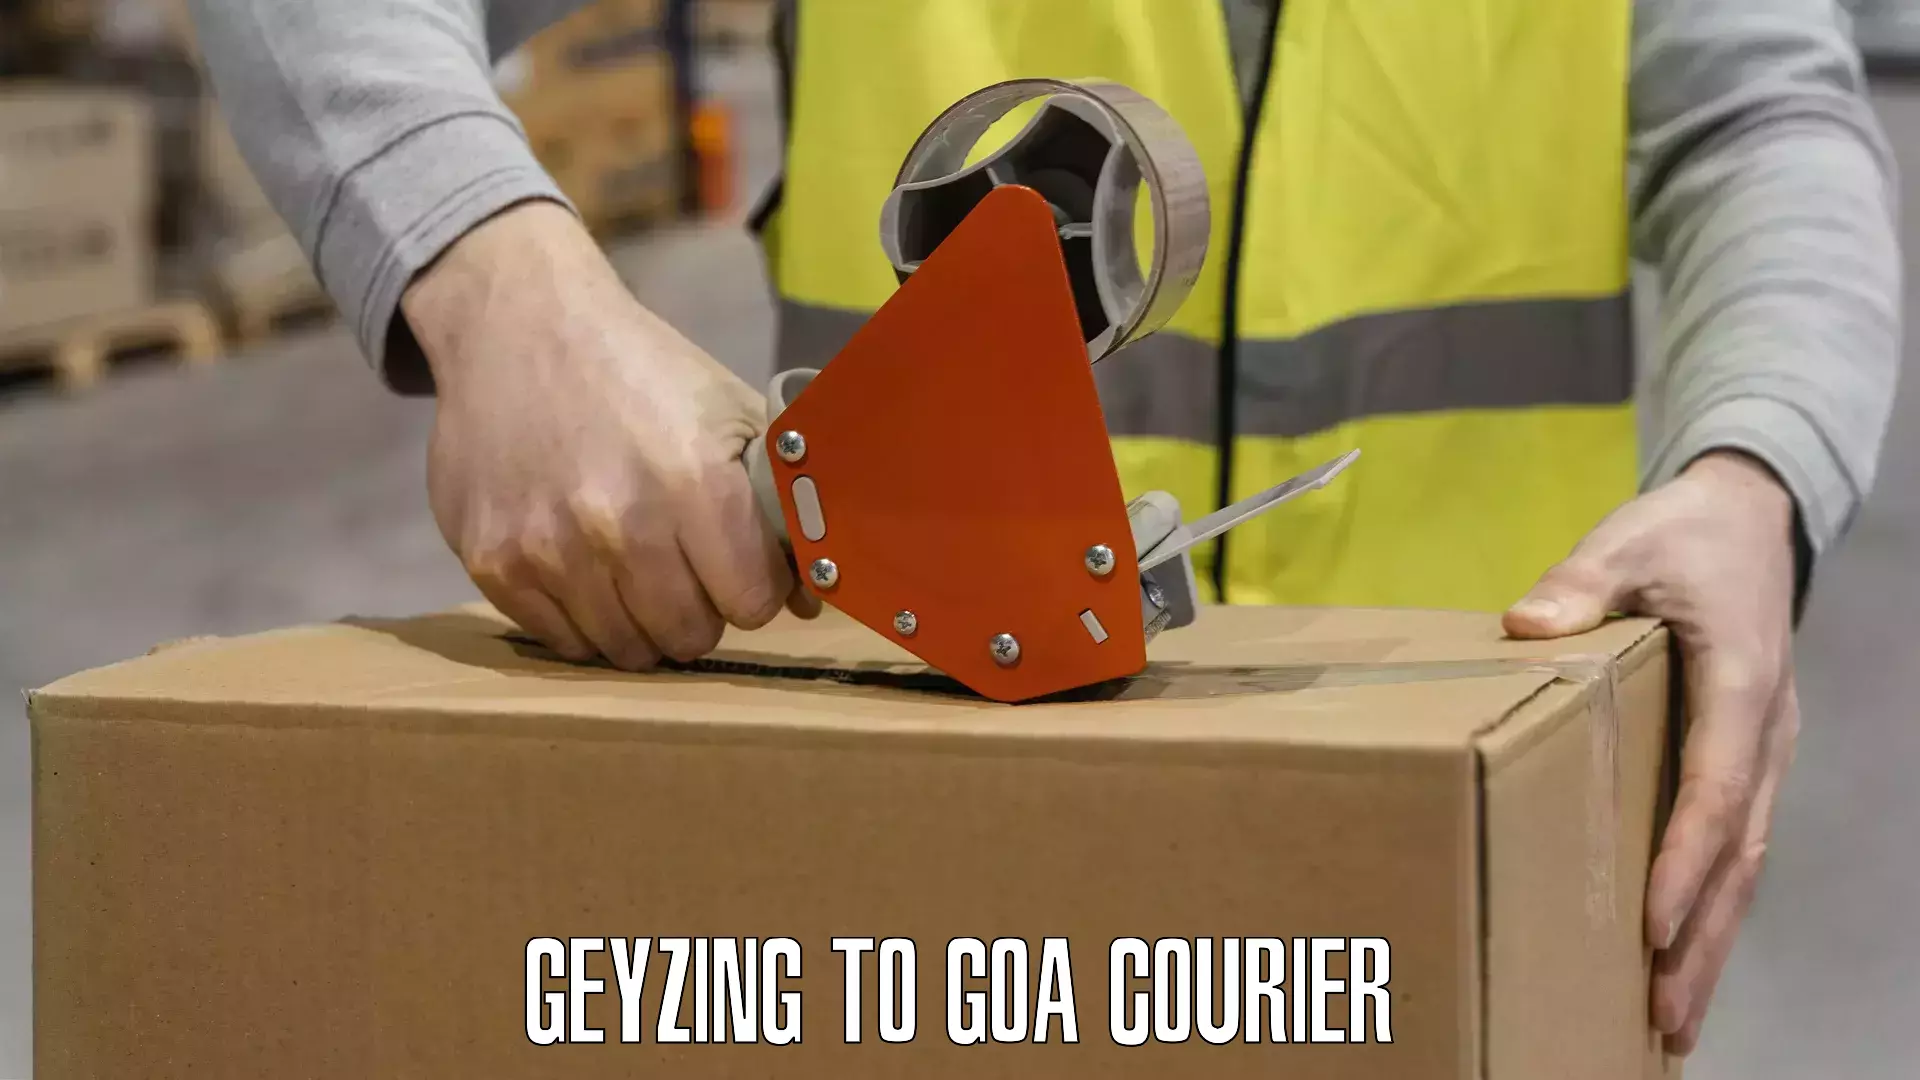 Professional courier services Geyzing to Goa